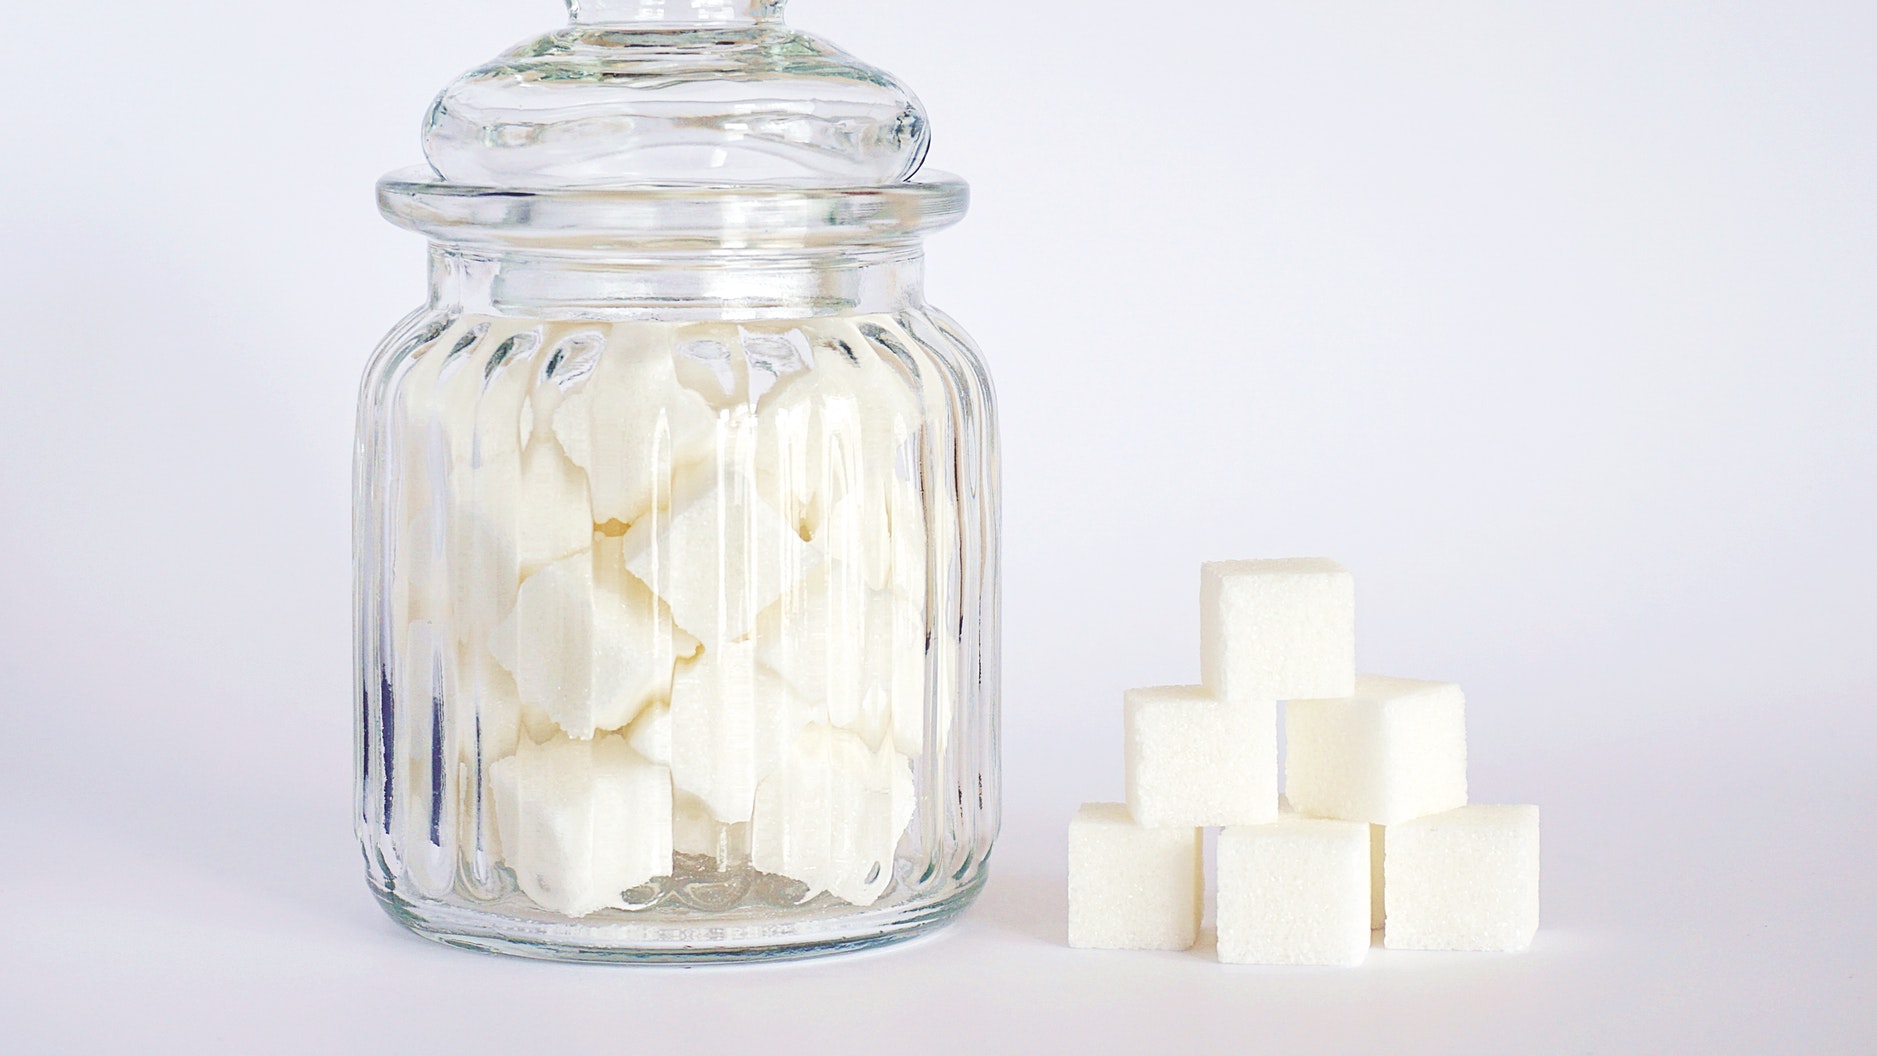 Sugar Detox Guide: How to Detox from Sugar the Right Way